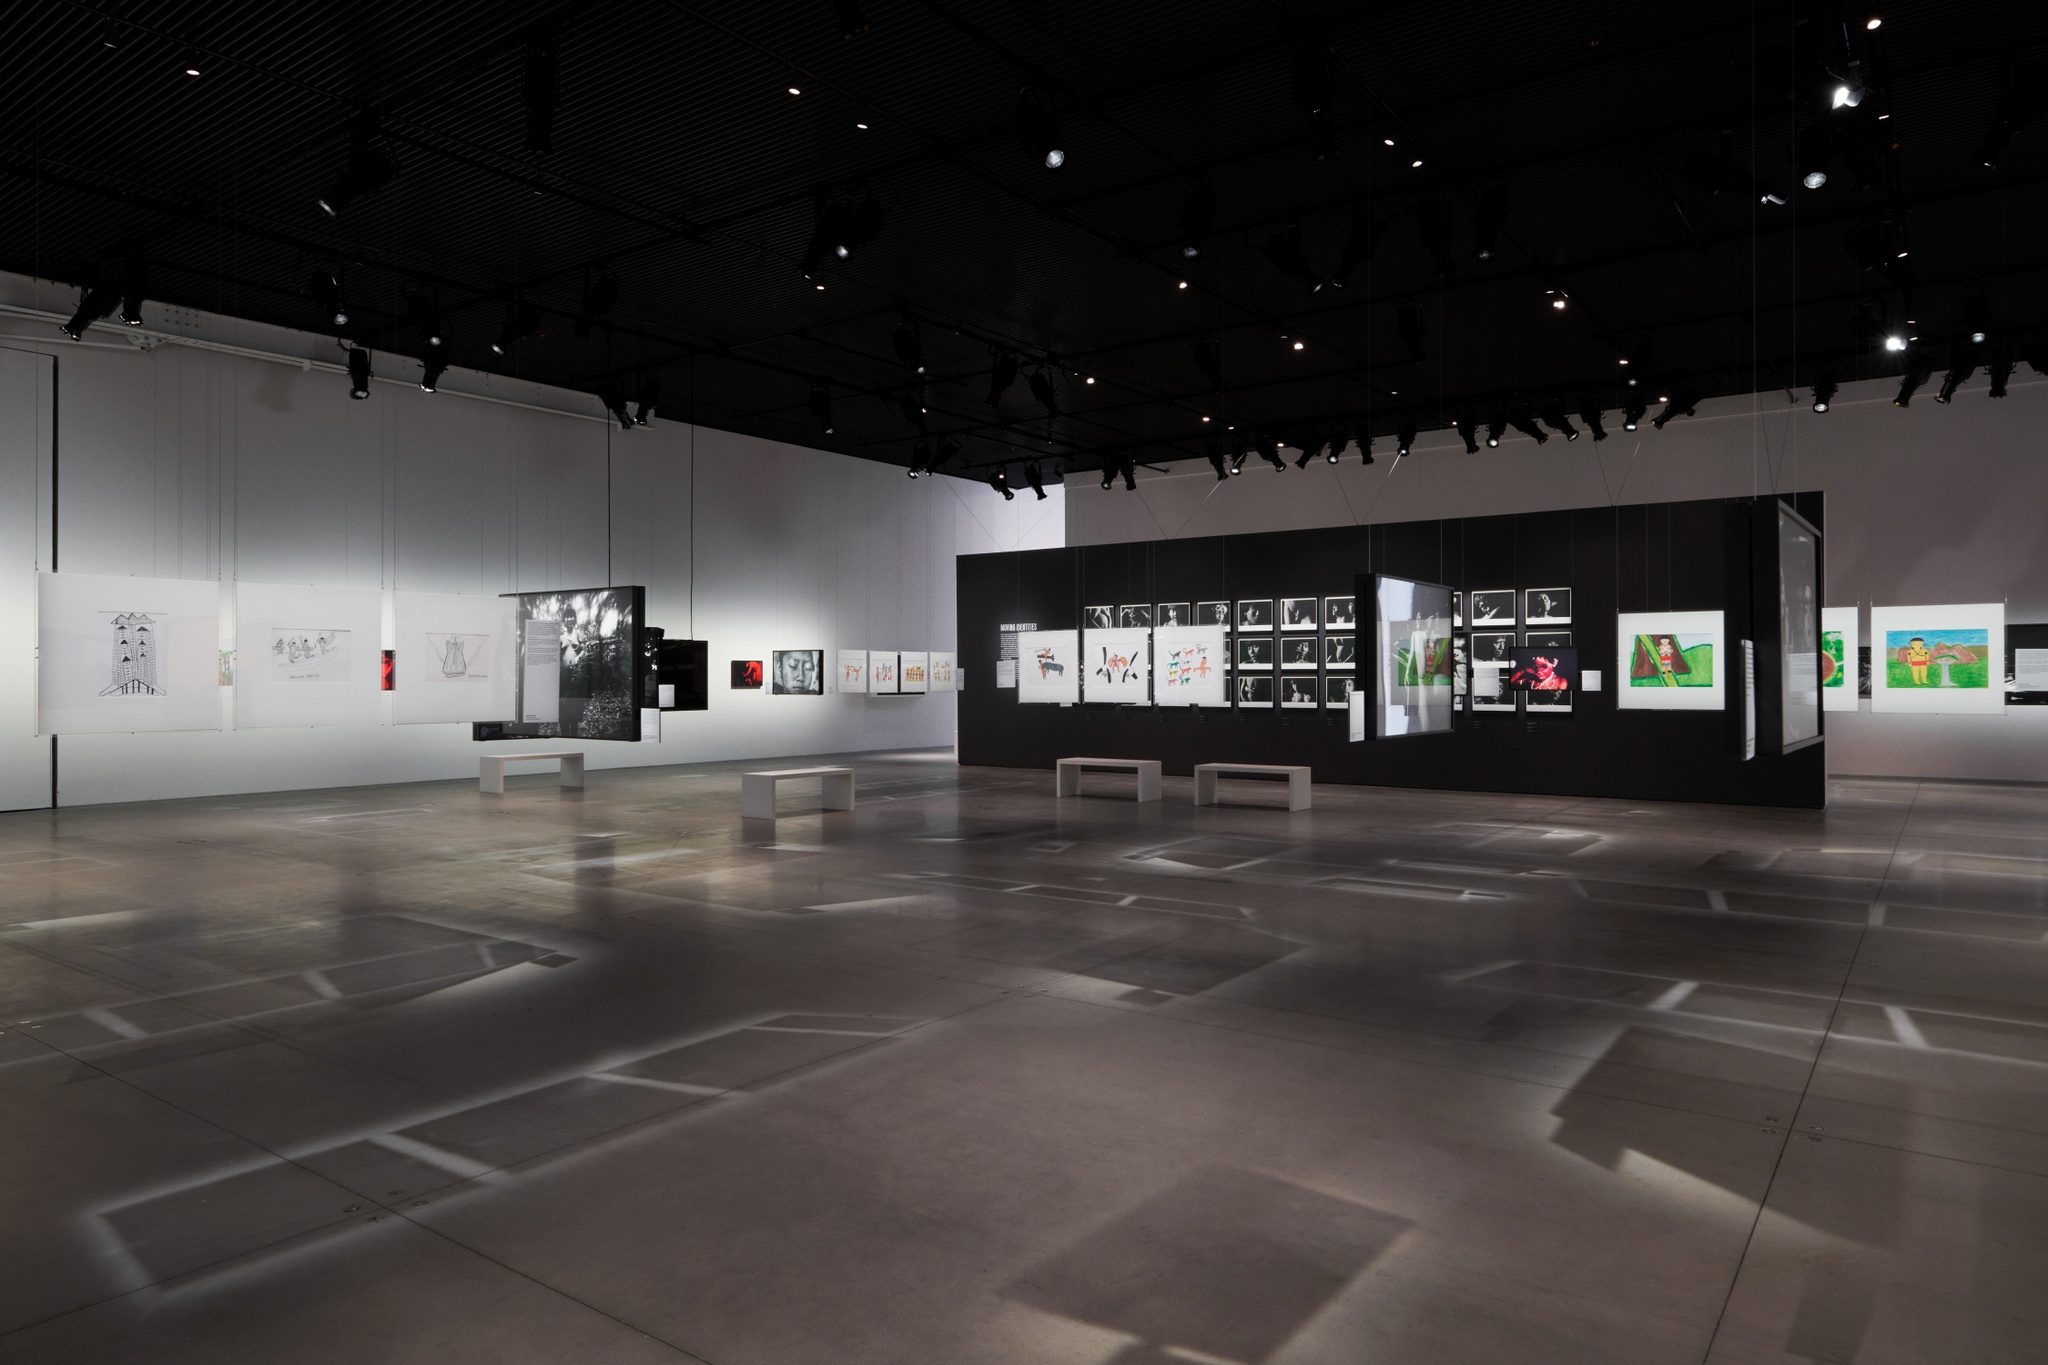 An art gallery with drawings and photos on walls and suspended from the ceiling. The suspended artworks make shadows of intersecting lines on the gray concrete floors. In the back of the gallery is a long wall painted black with a grid of black-and-white photo portraits of Yanomami subjects.